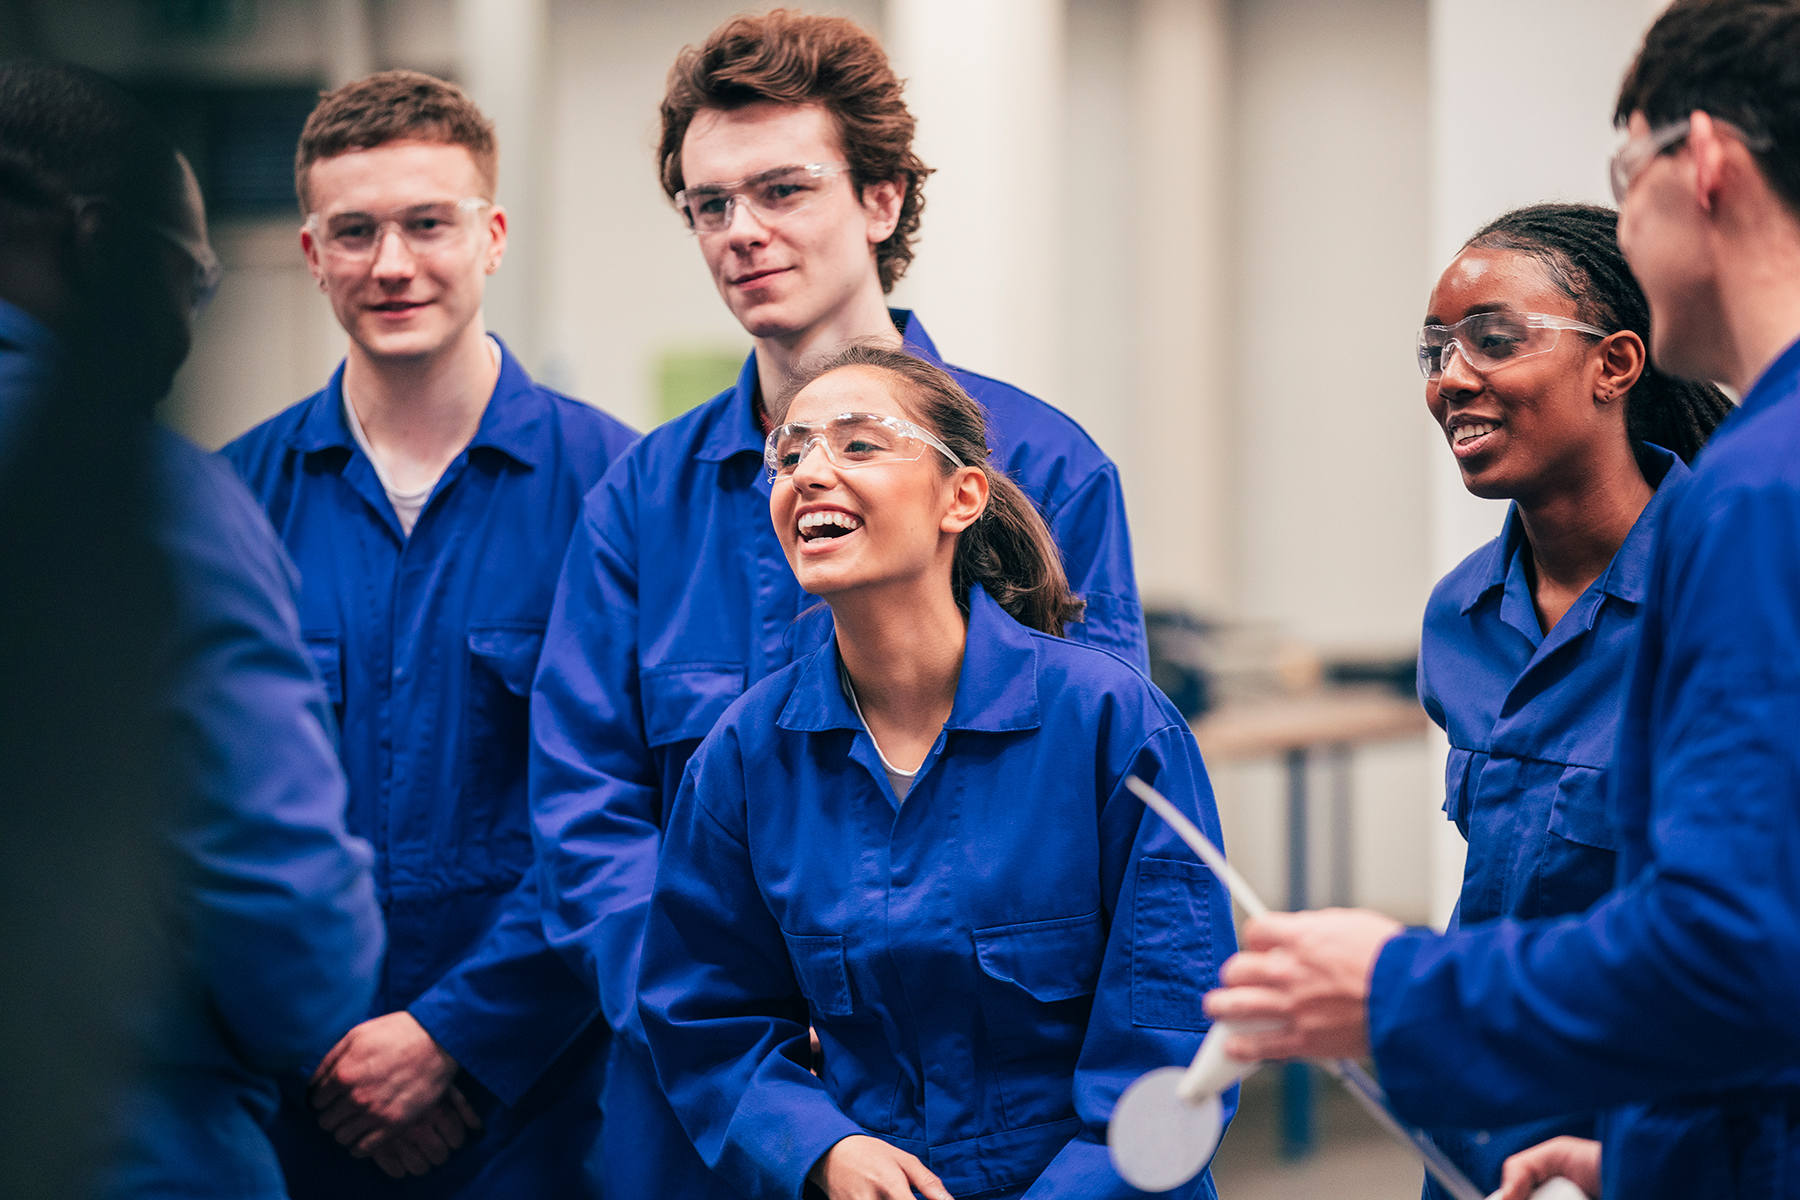 A group of young apprentices in blue boiler suits laughing. Some are wearing goggles.